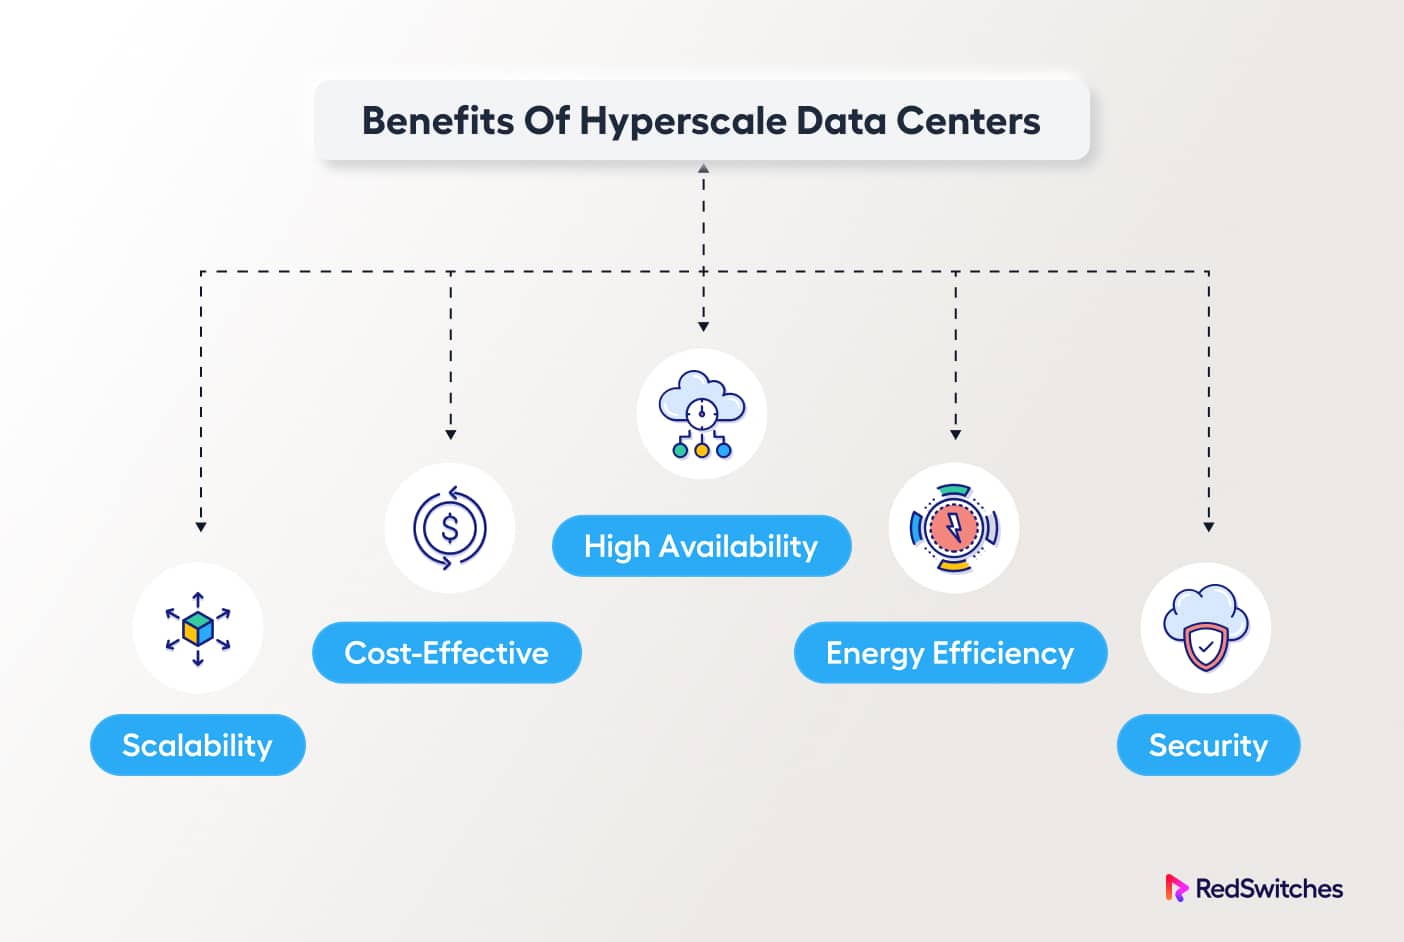 Benefits of Hyperscale Data Centers